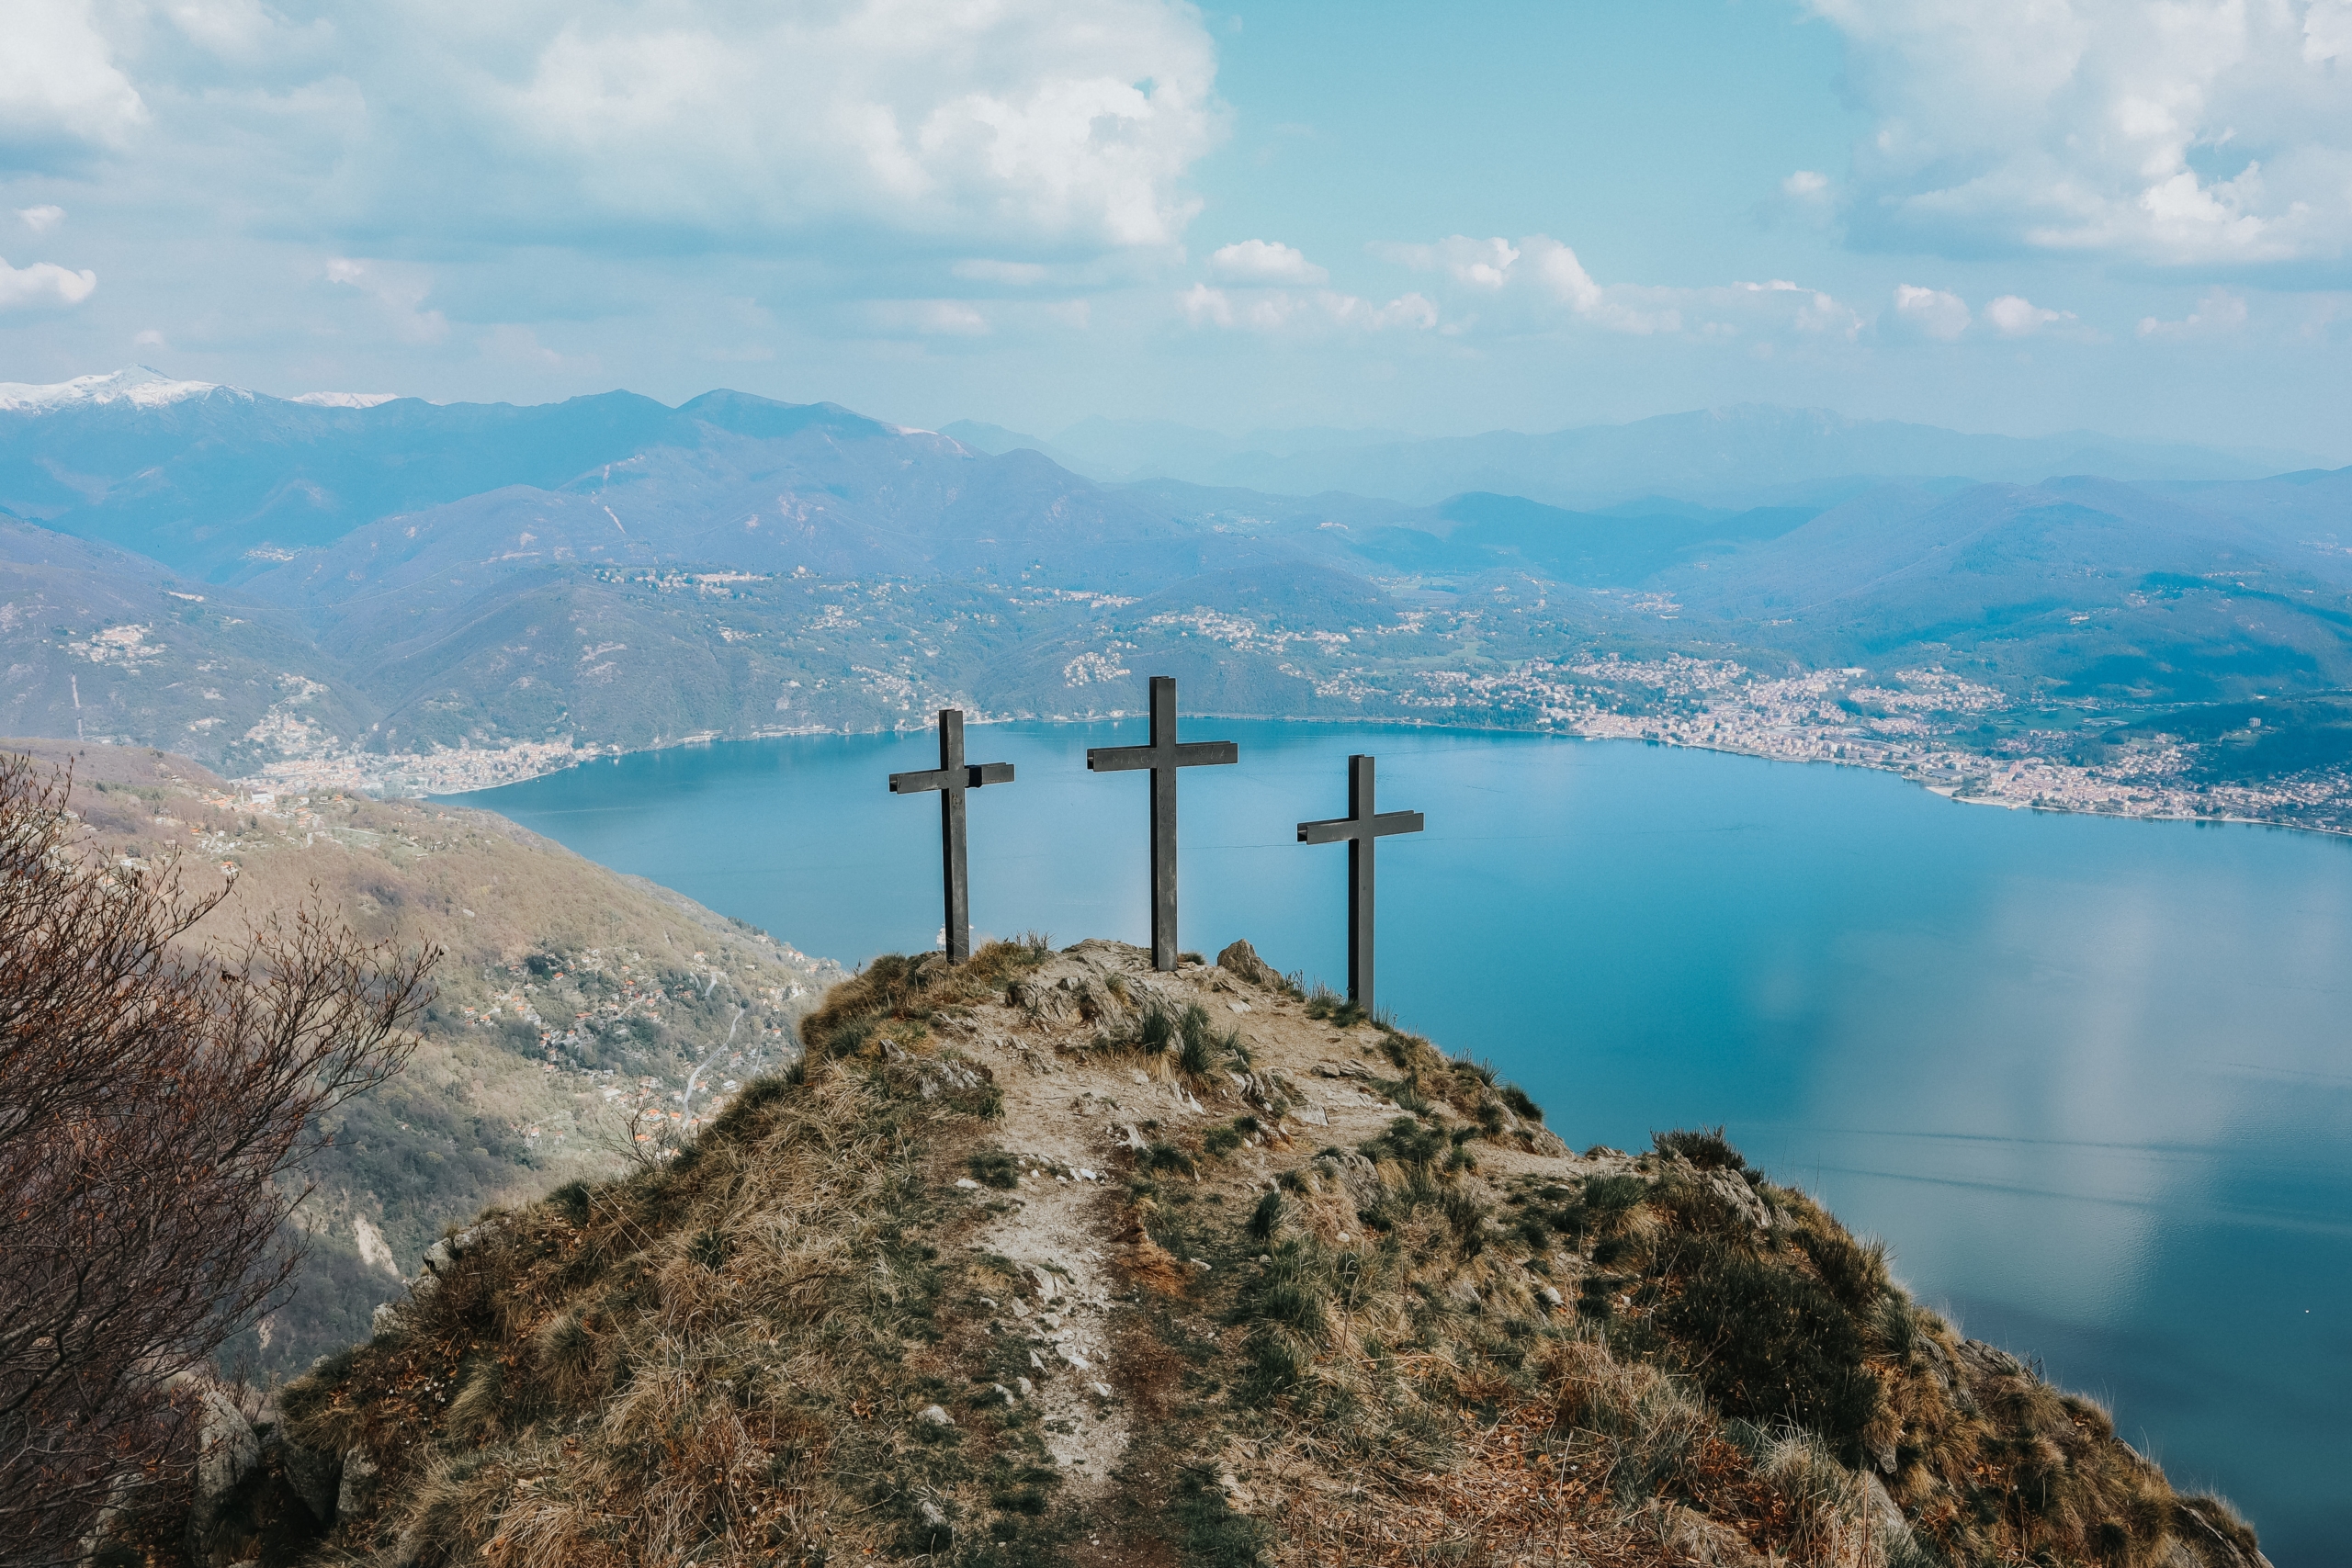 3 wooden cross on top of the mountain